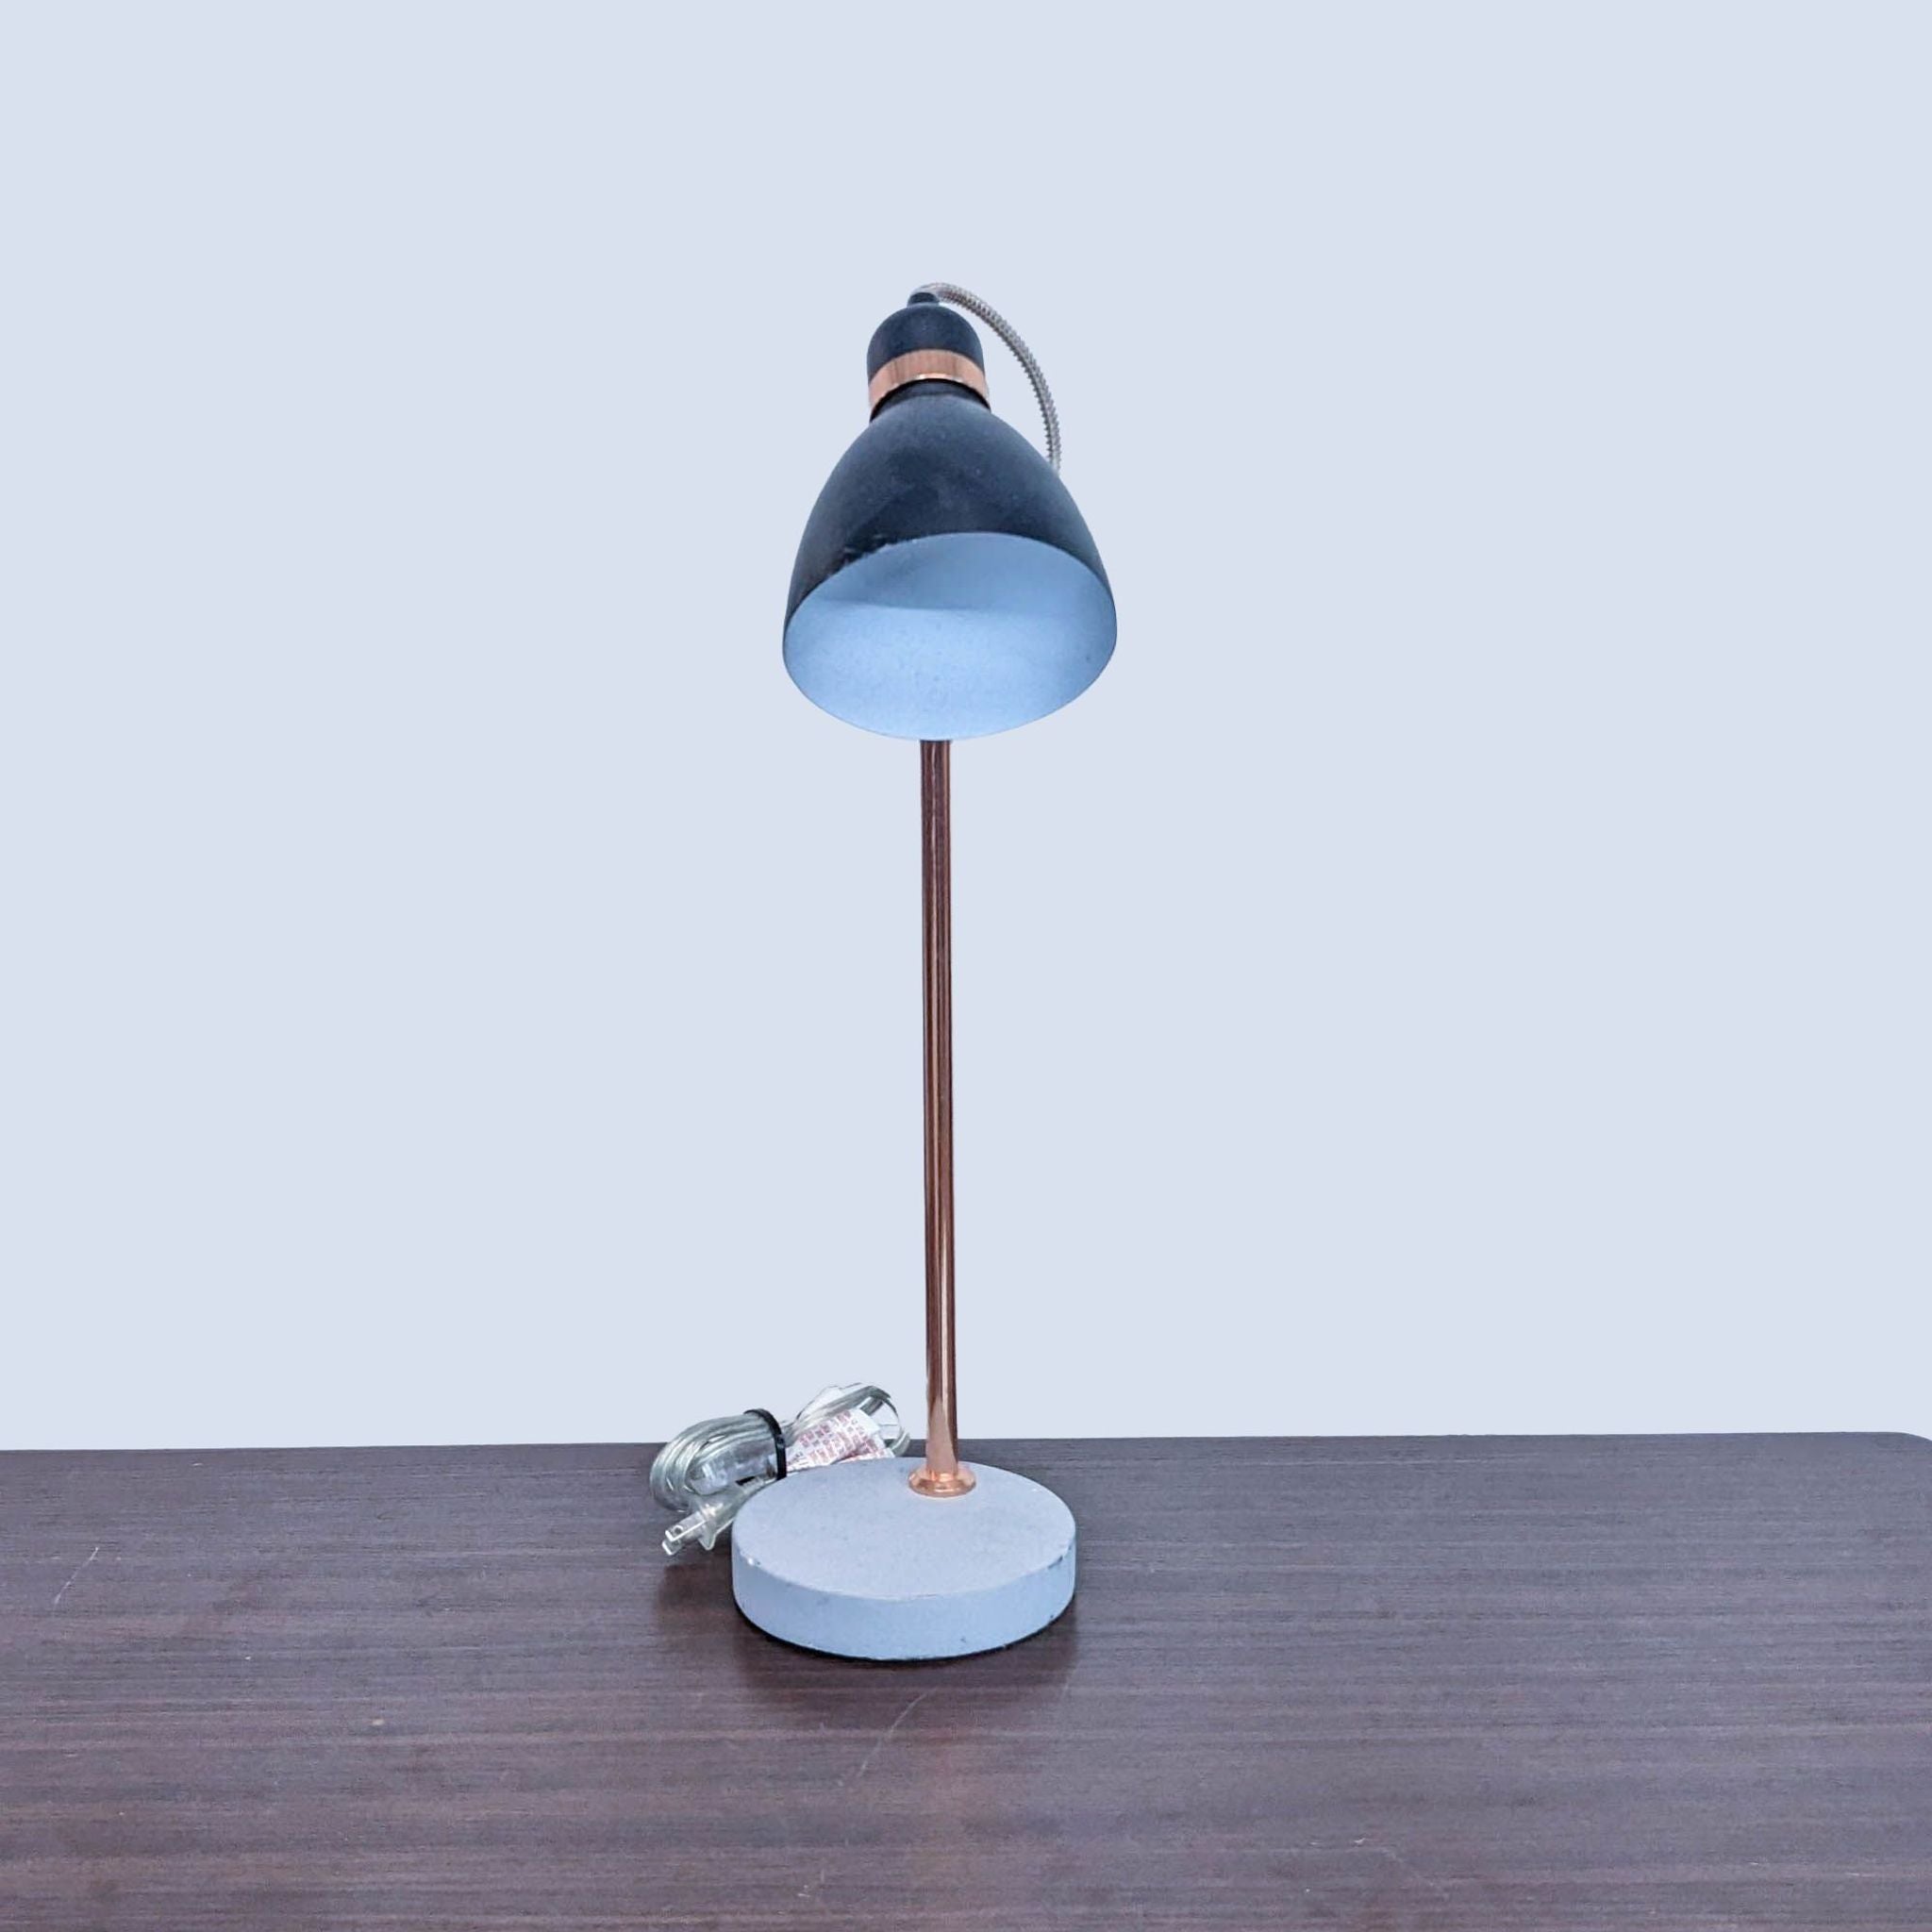 Reperch branded table lamp with blue shade and copper post on wooden surface.